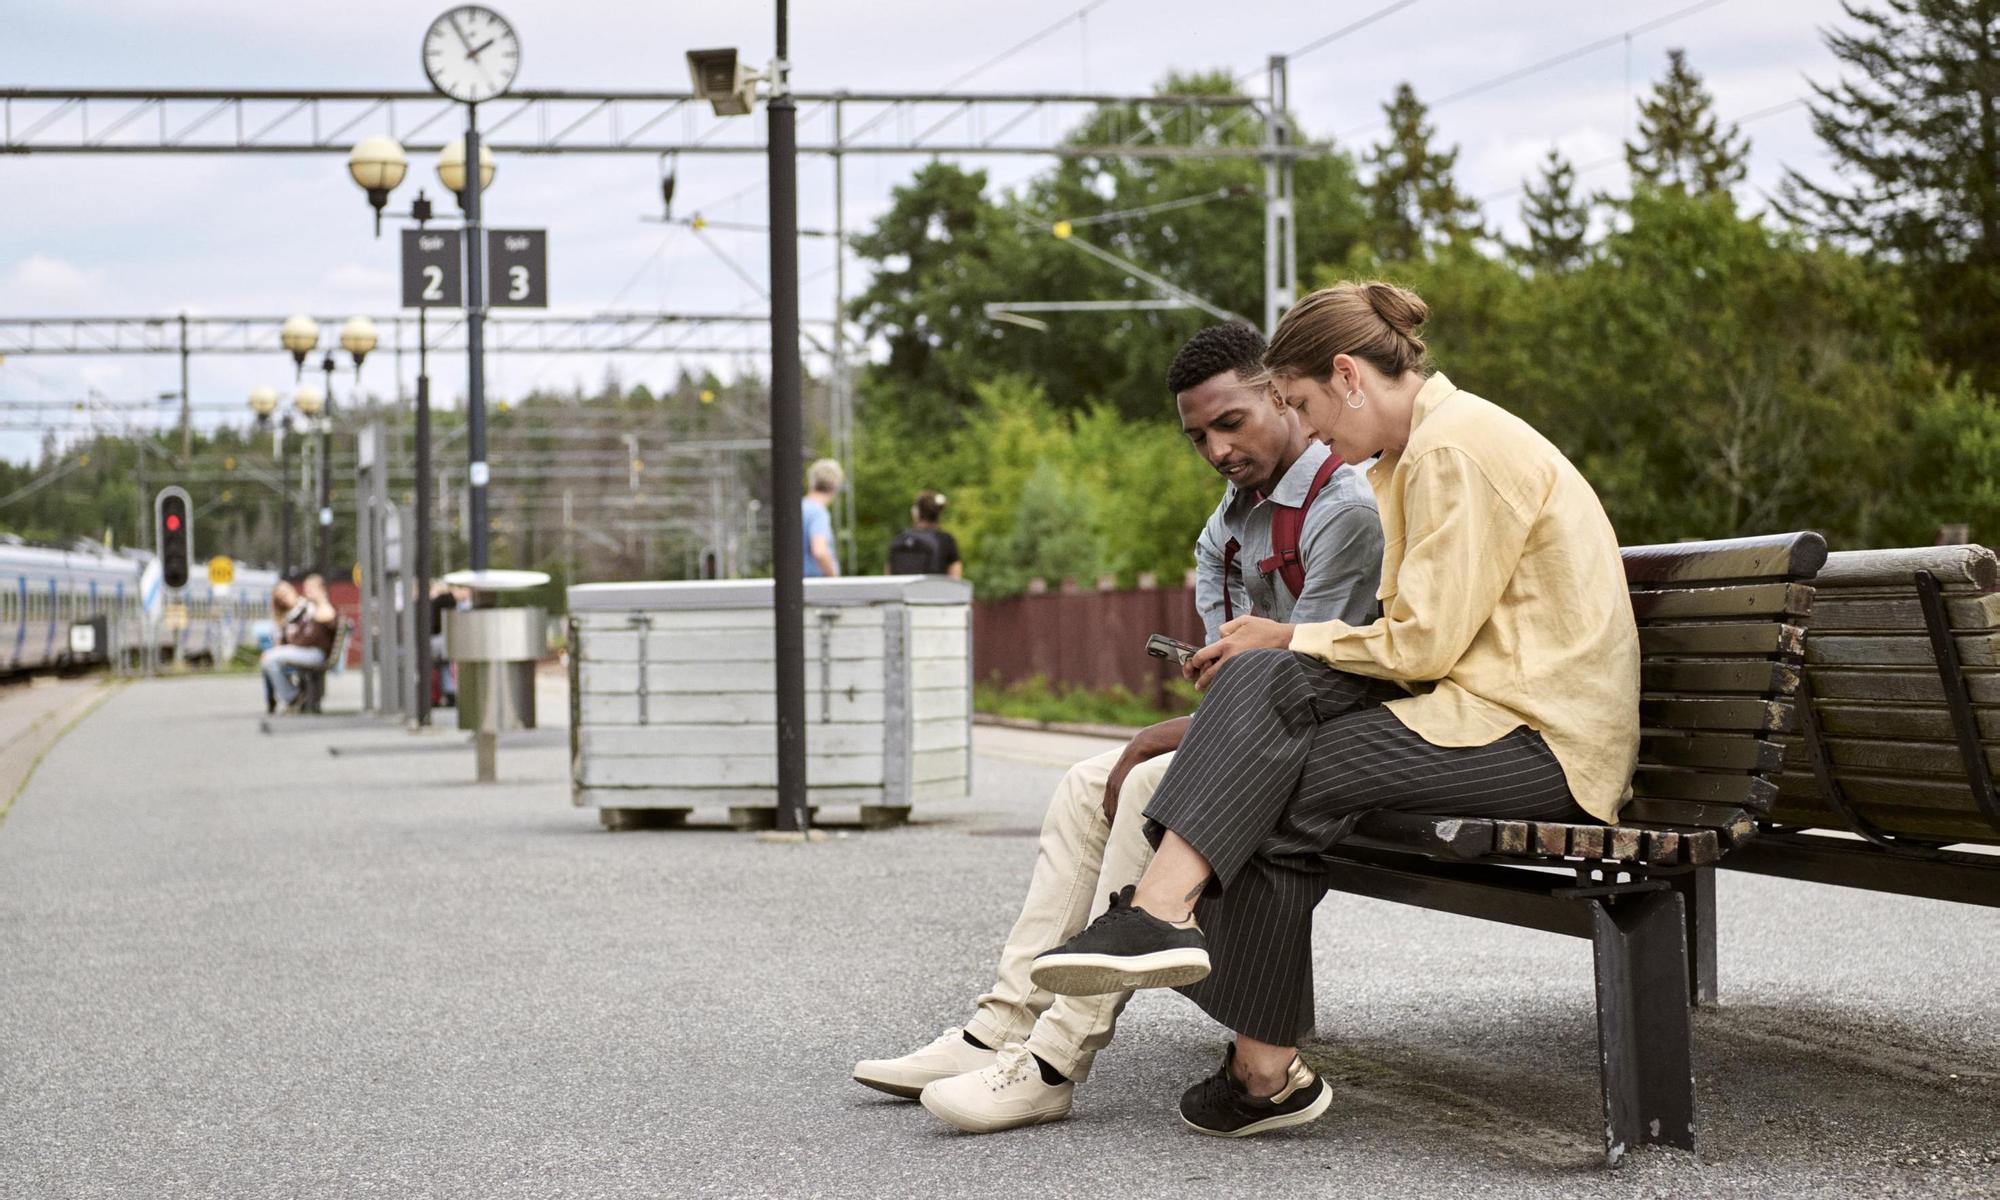 Couple sitting on a bench waiting for the train